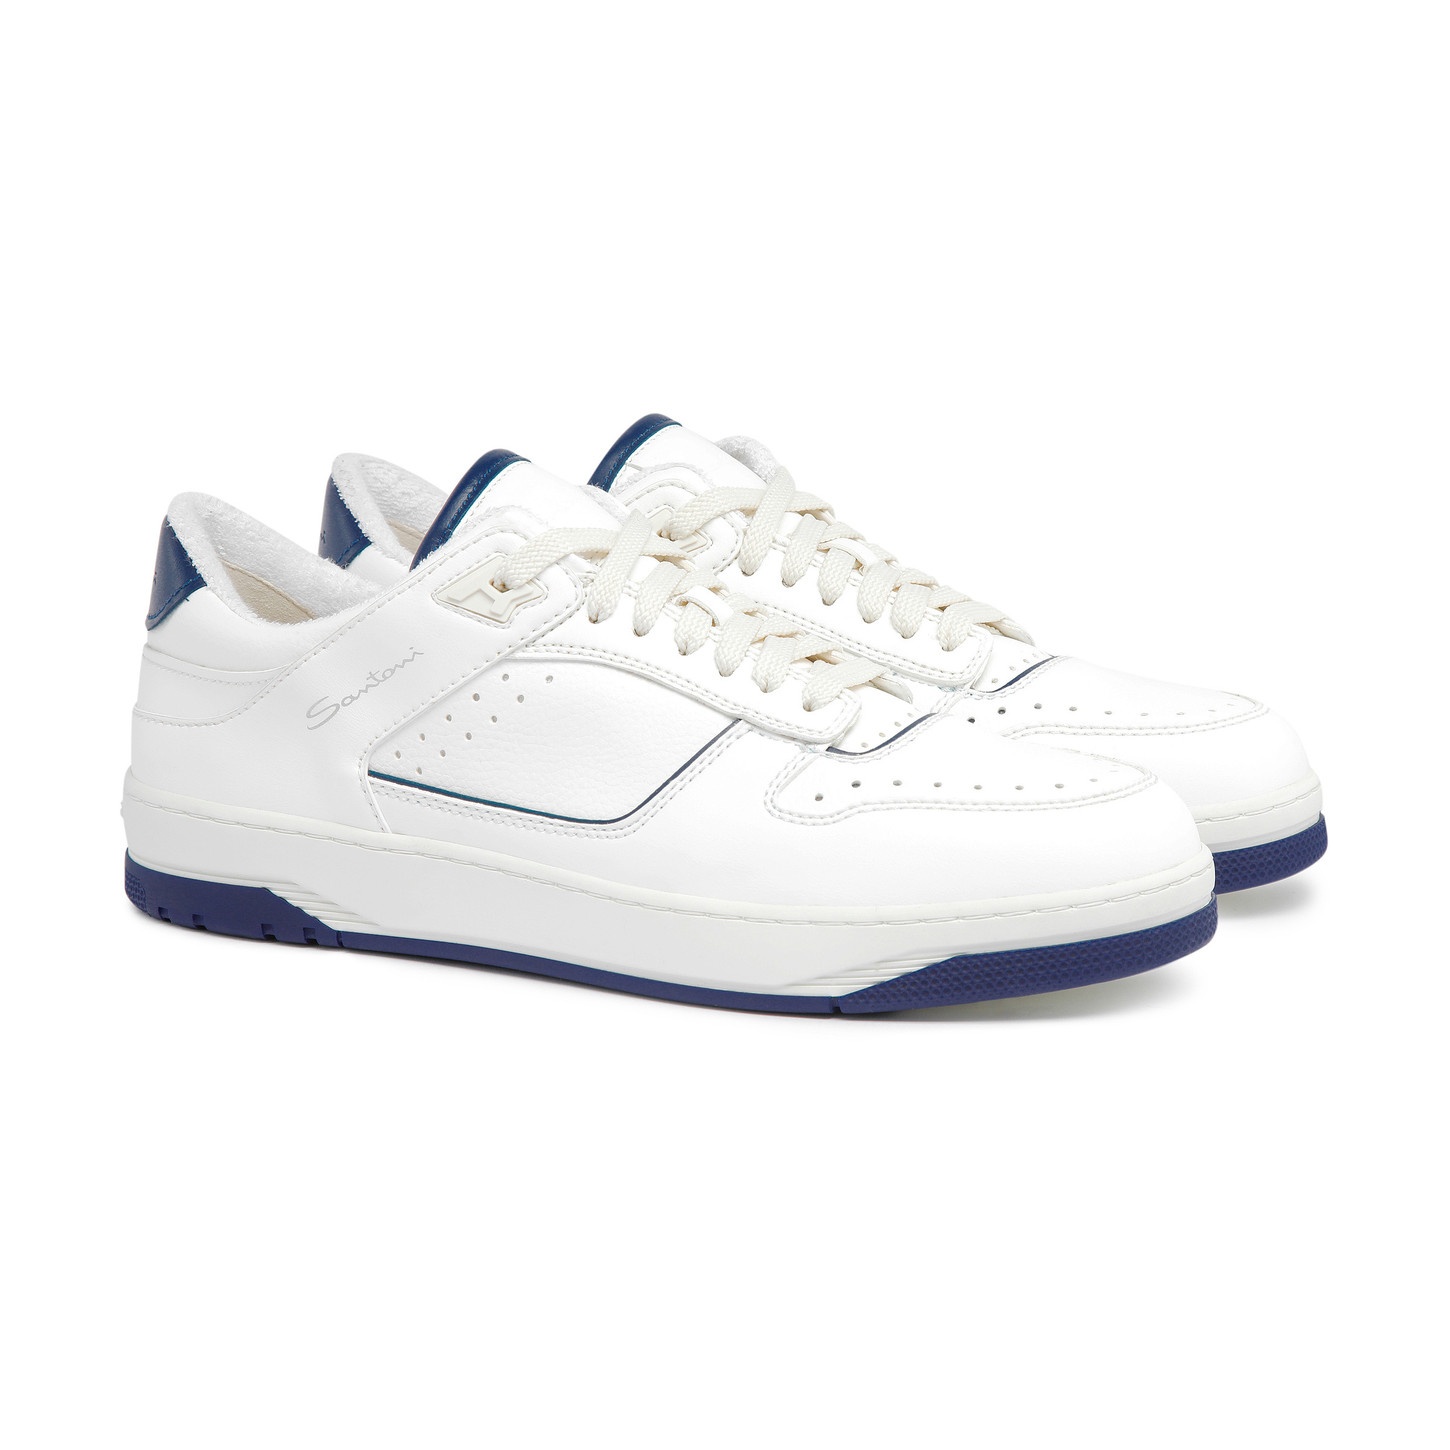 Men's white and blue leather Sneak-Air sneaker - 3